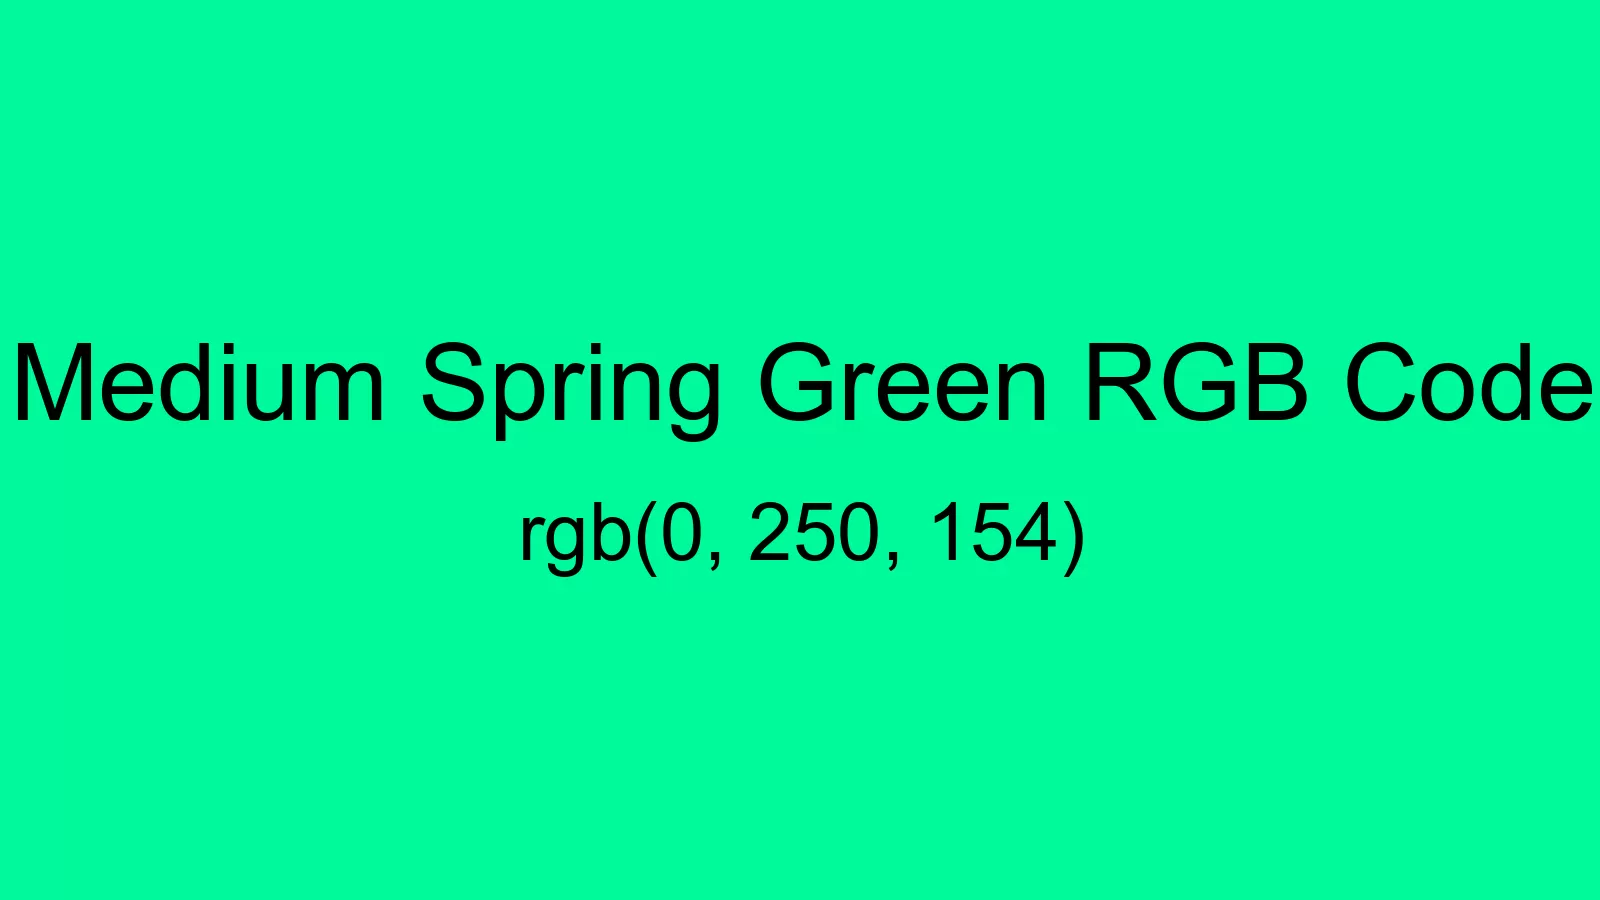 preview image of Medium Spring Green color and RGB code